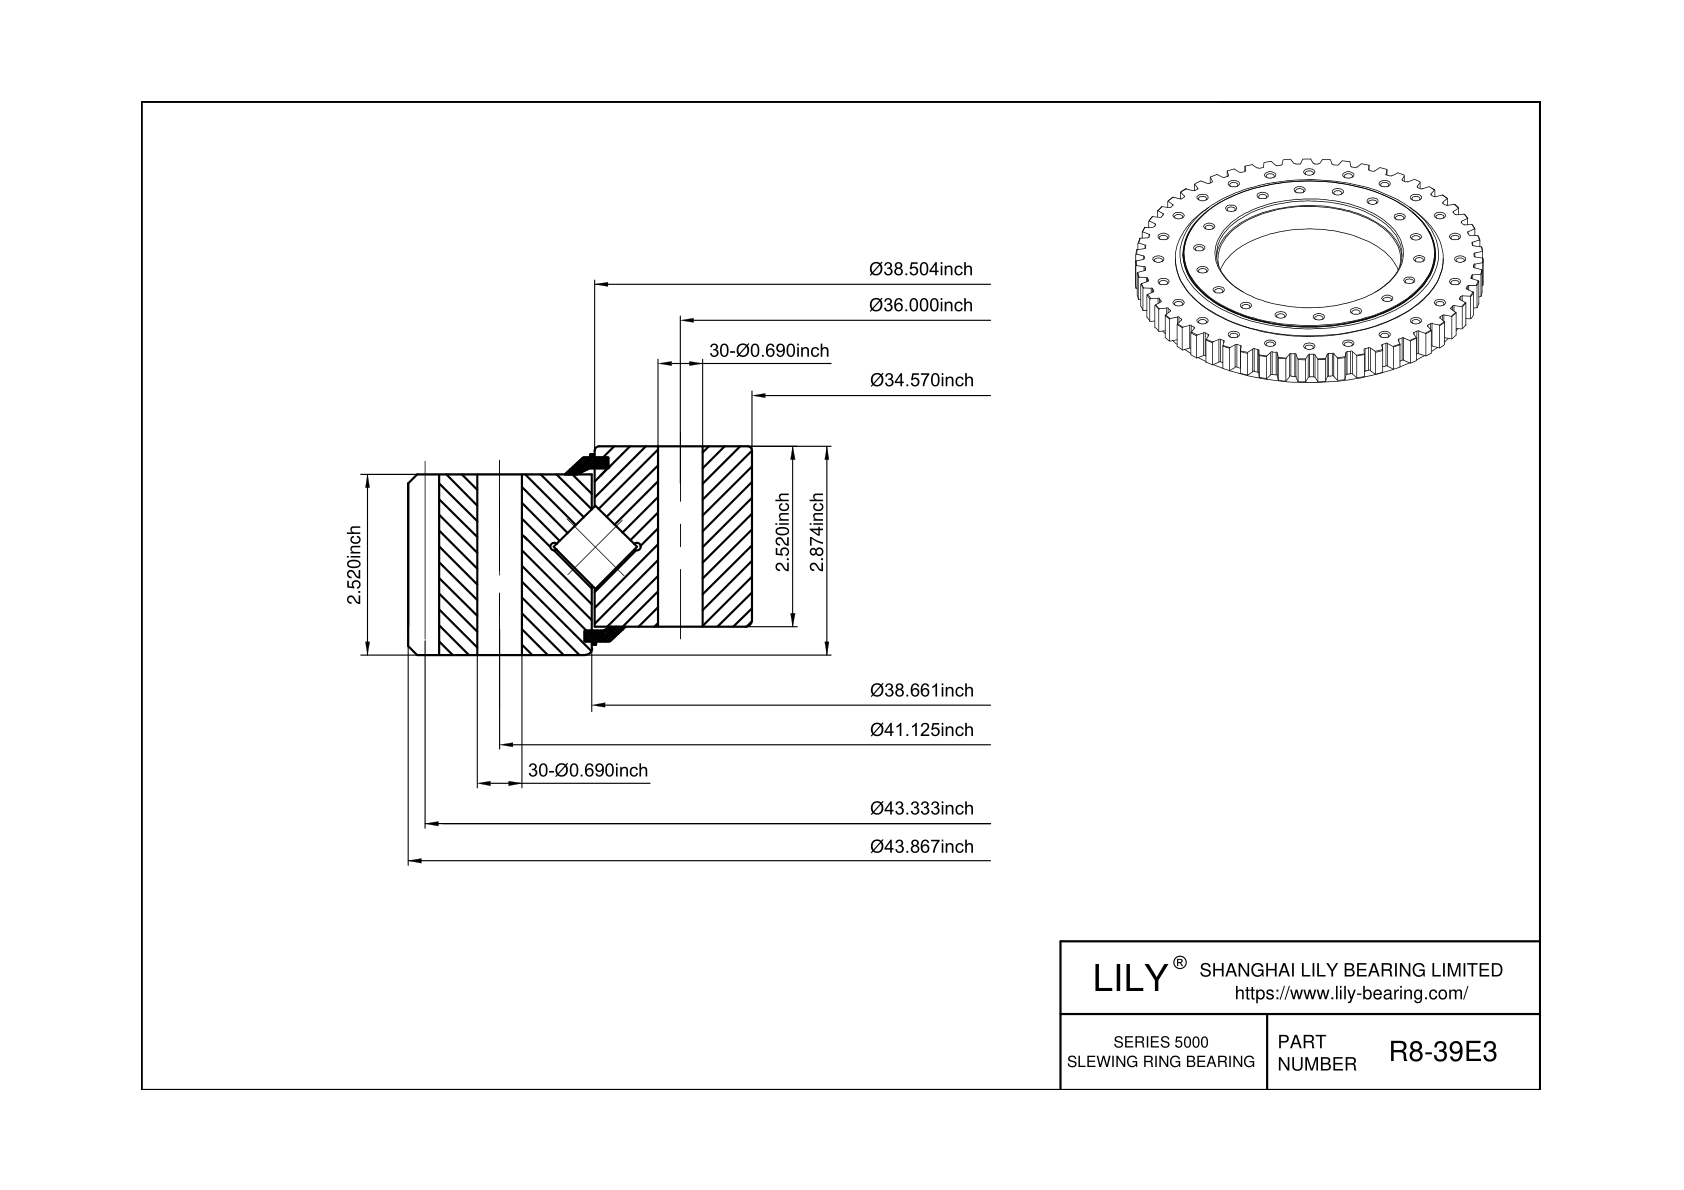 R8-39E3 Cross Roller Slewing Ring Bearing cad drawing